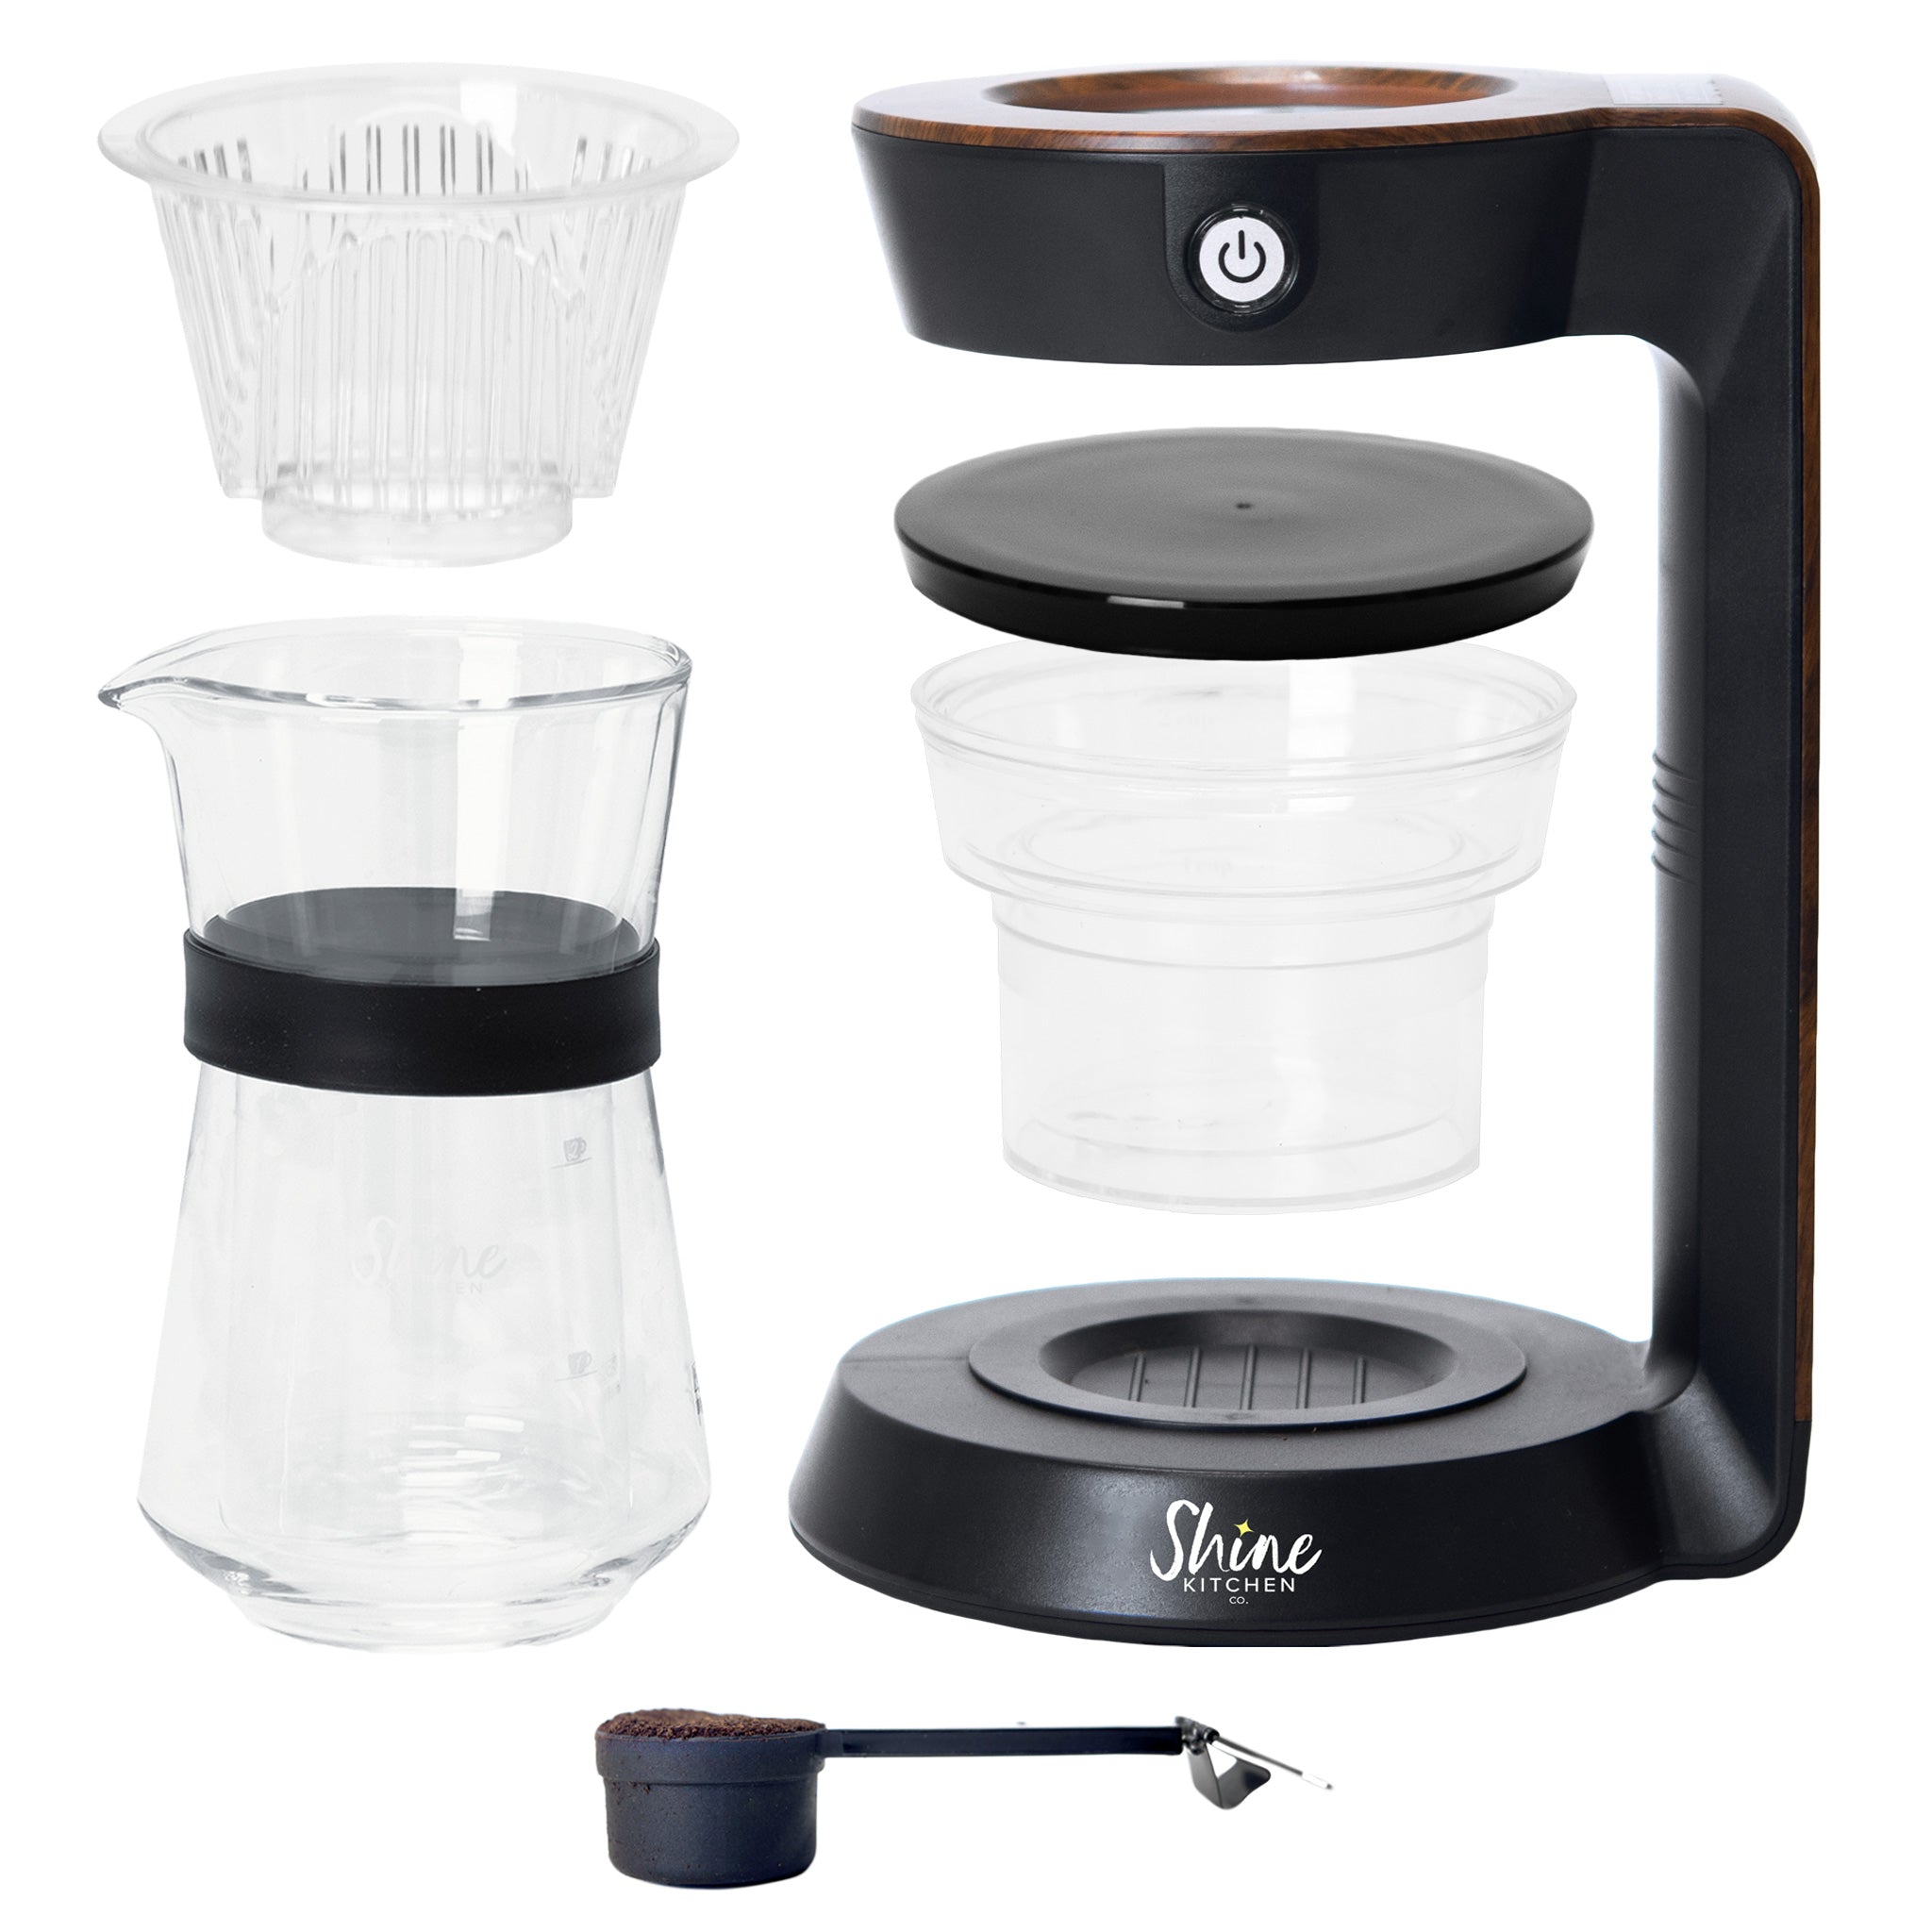 Shine Kitchen Co.® Automatic Pour Over Coffee Machine and Kettle Bundl